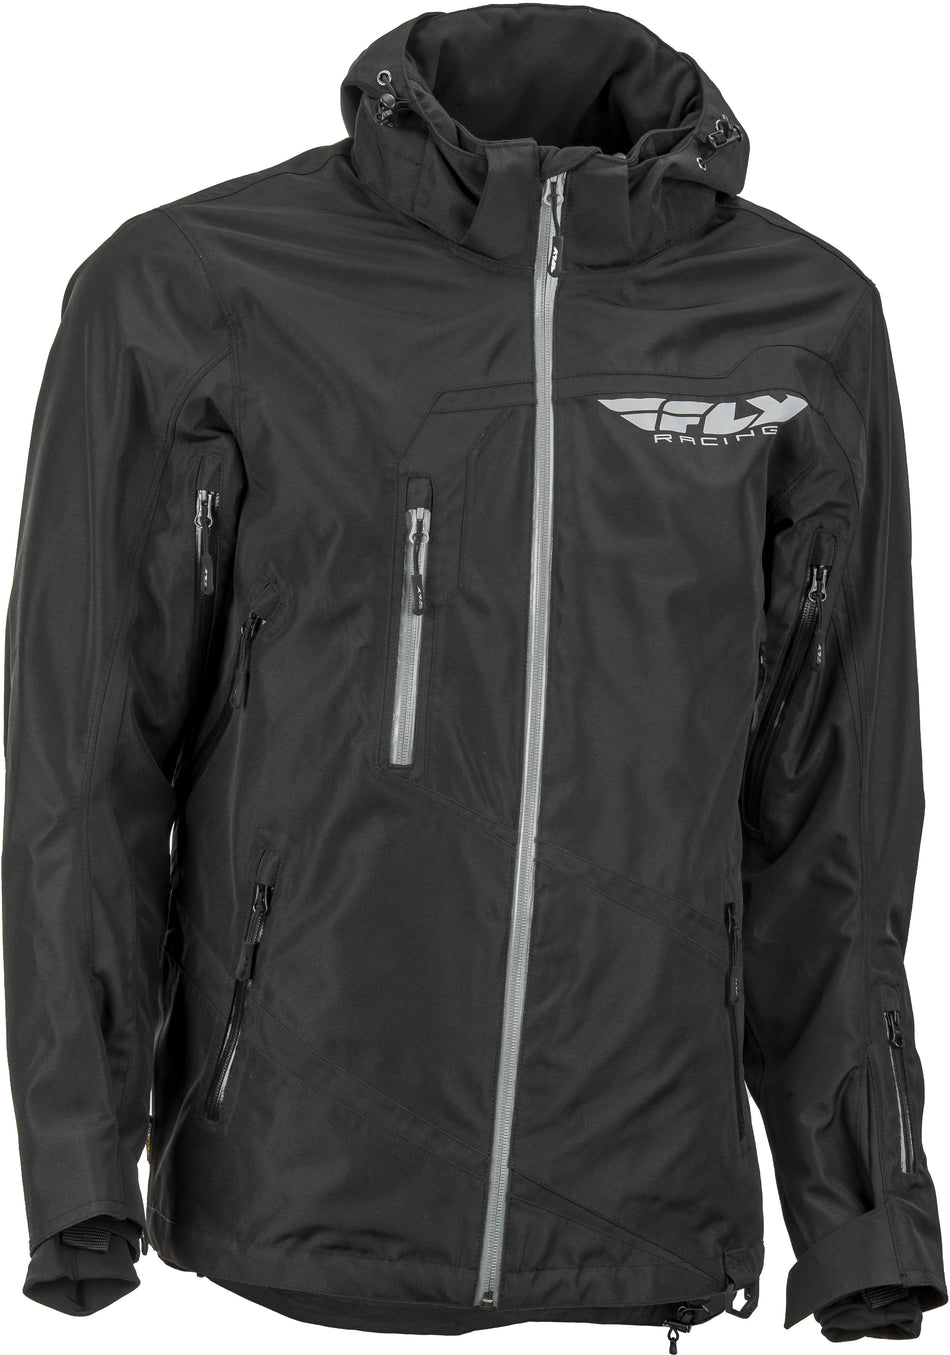 FLY RACING Fly Carbon Jacket Black Xl 470-4040X